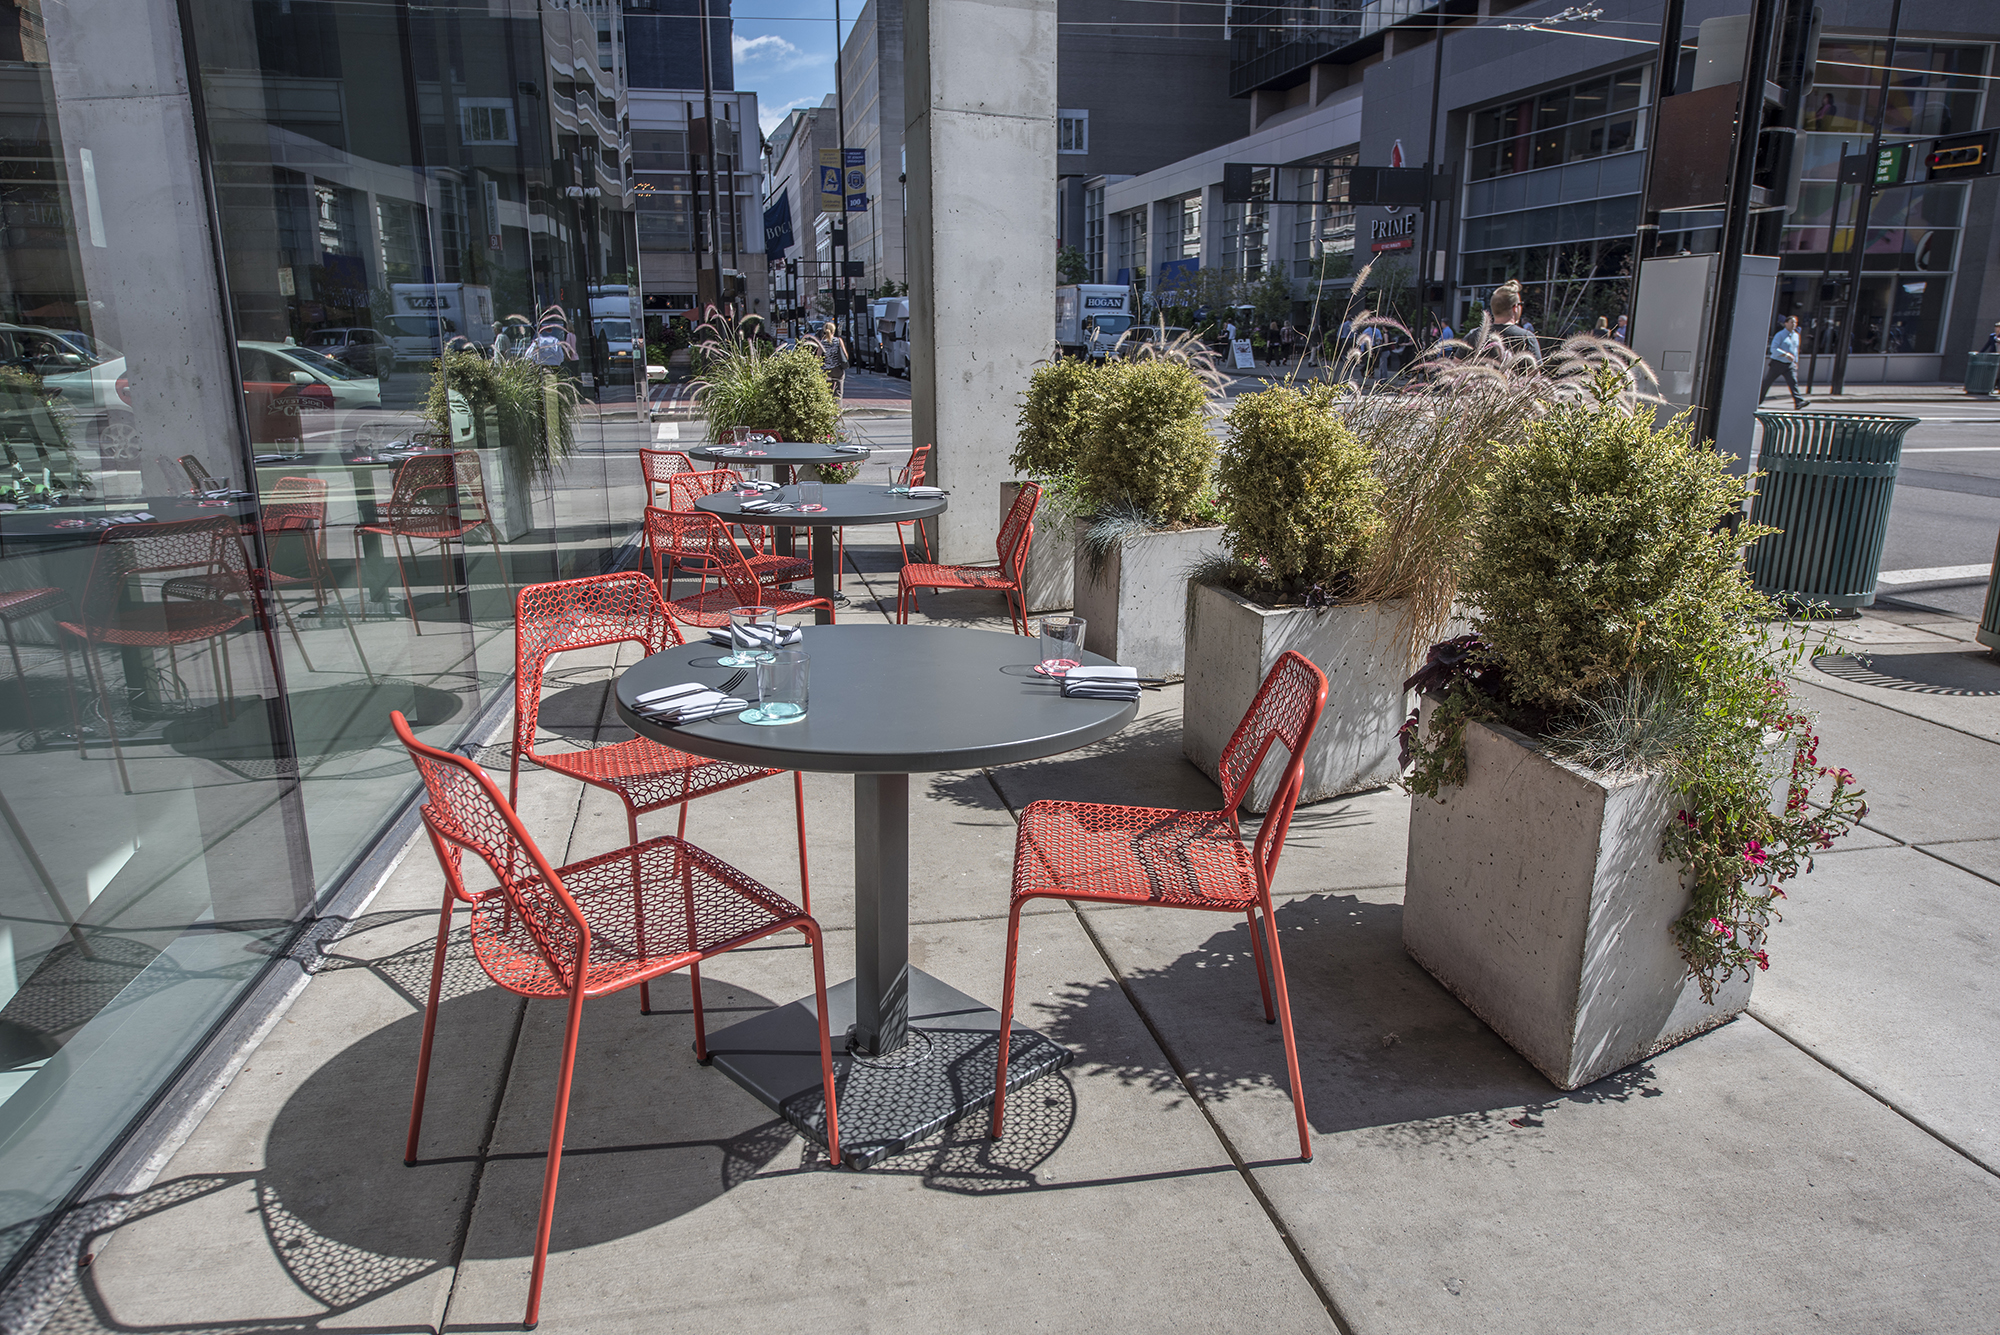  Outdoor patio seating with gorgeous downtown views at  Fausto at the CAC . || Image:  Twin Spire Photography  - Published: 10.2.2019 